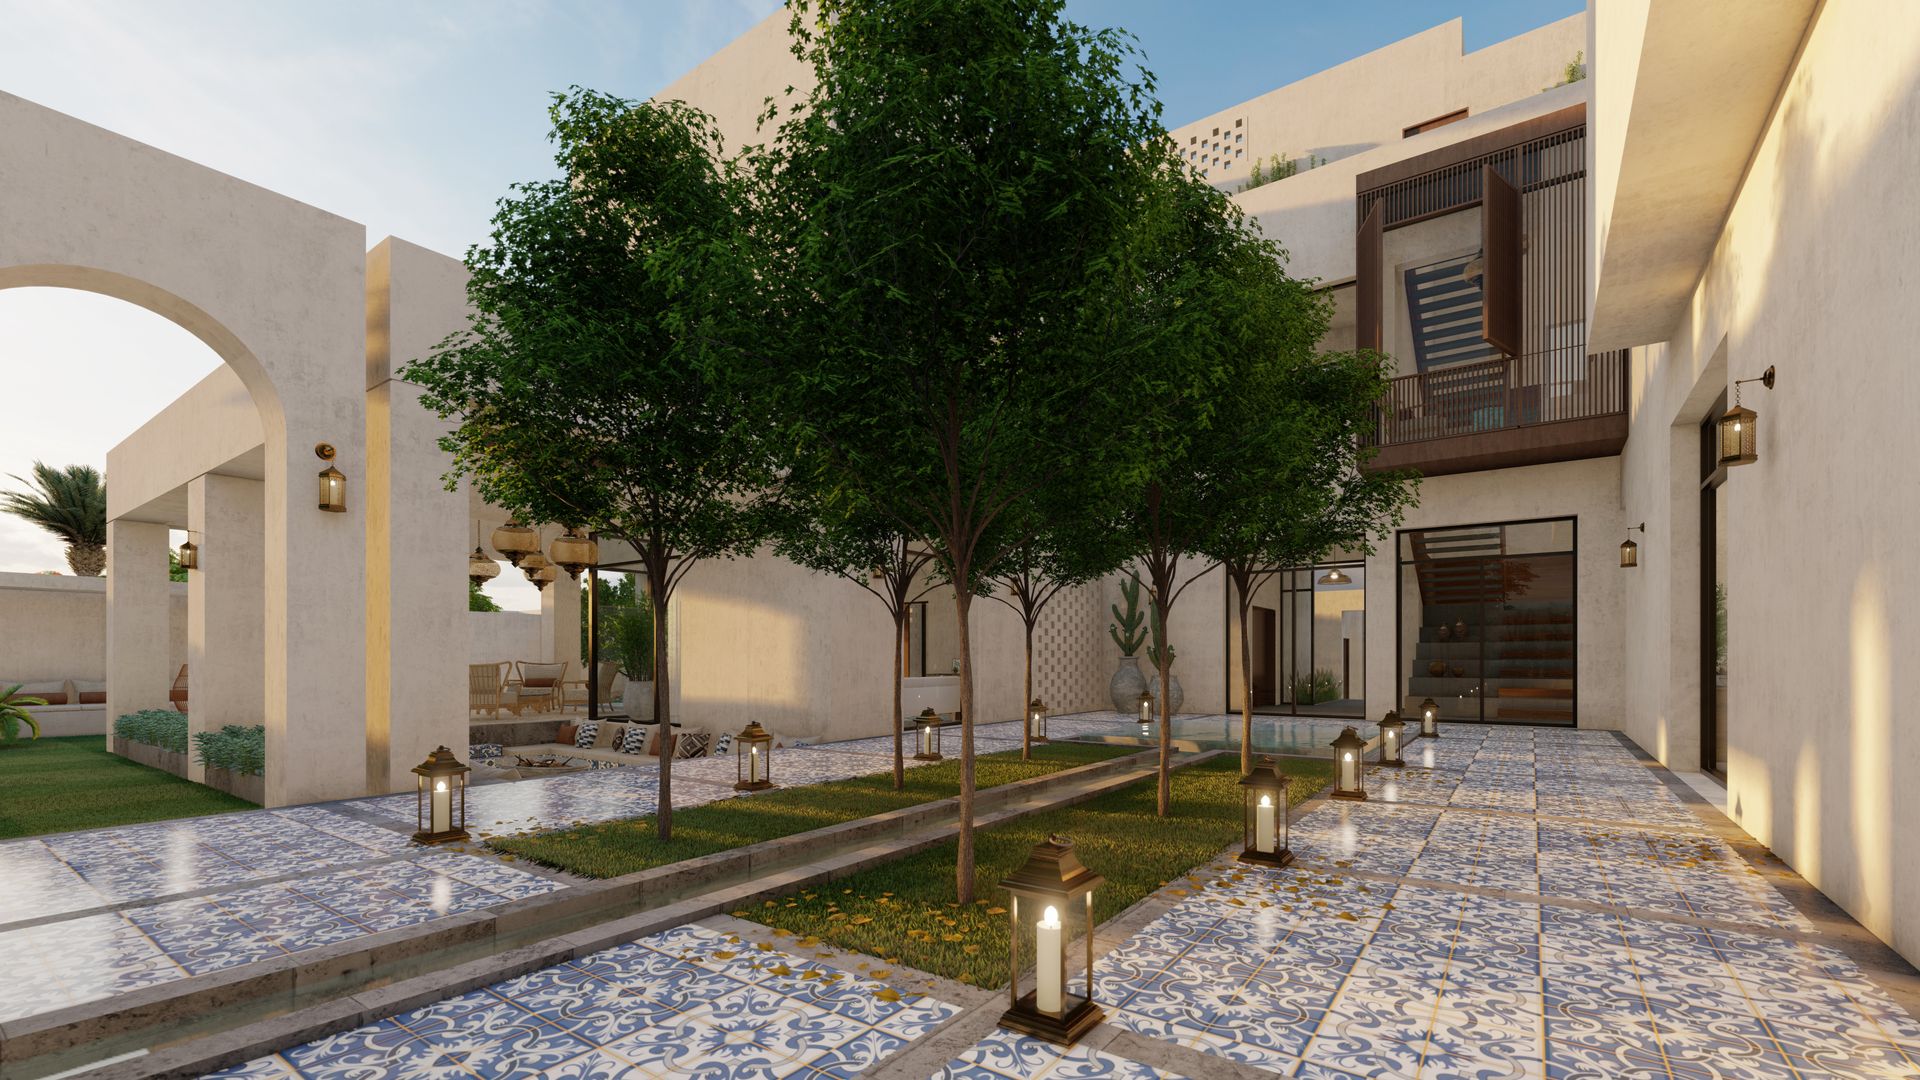 Designing homes in the UAE that cater to local culture